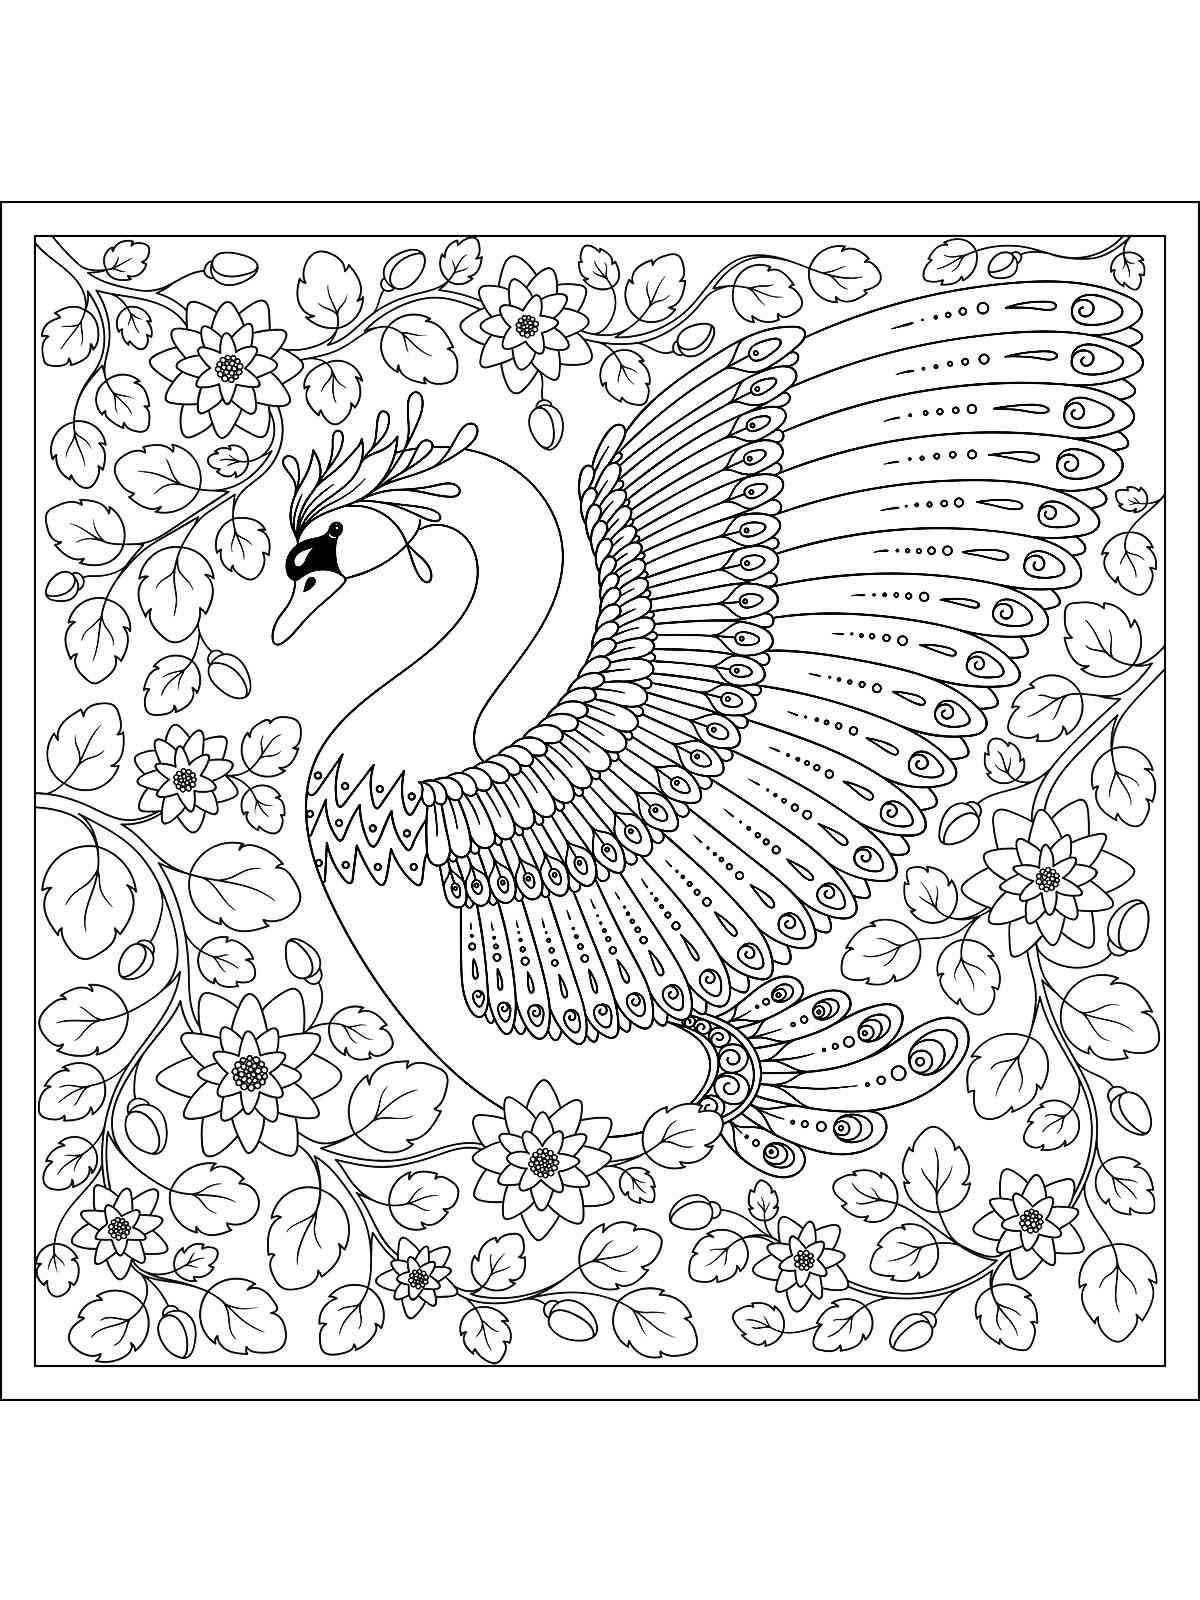 Swan coloring pages for adults